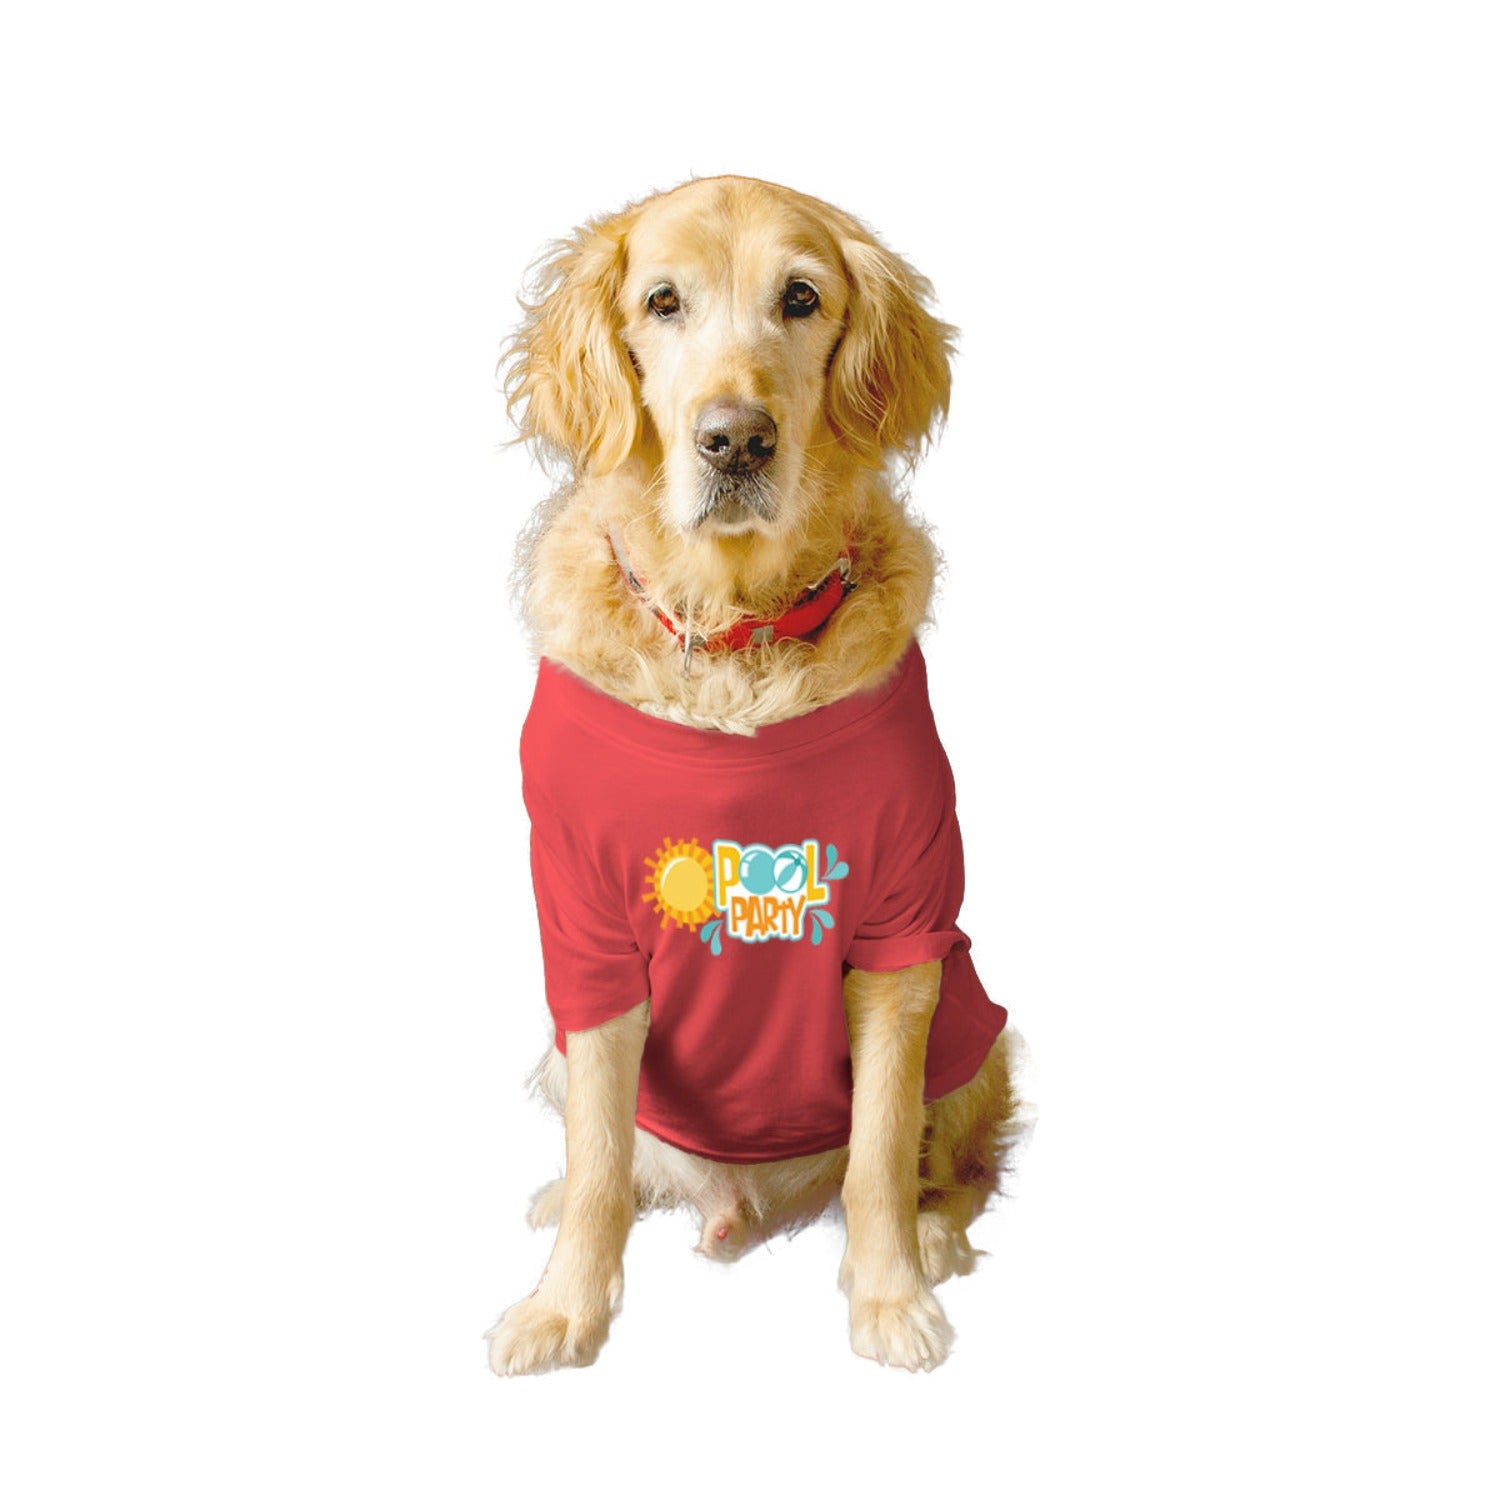 Ruse XX-Small (Chihuahuas, Papillons) / Poppy Red Ruse Basic Crew Neck "Pool Party" Printed Half Sleeves Dog Tee8